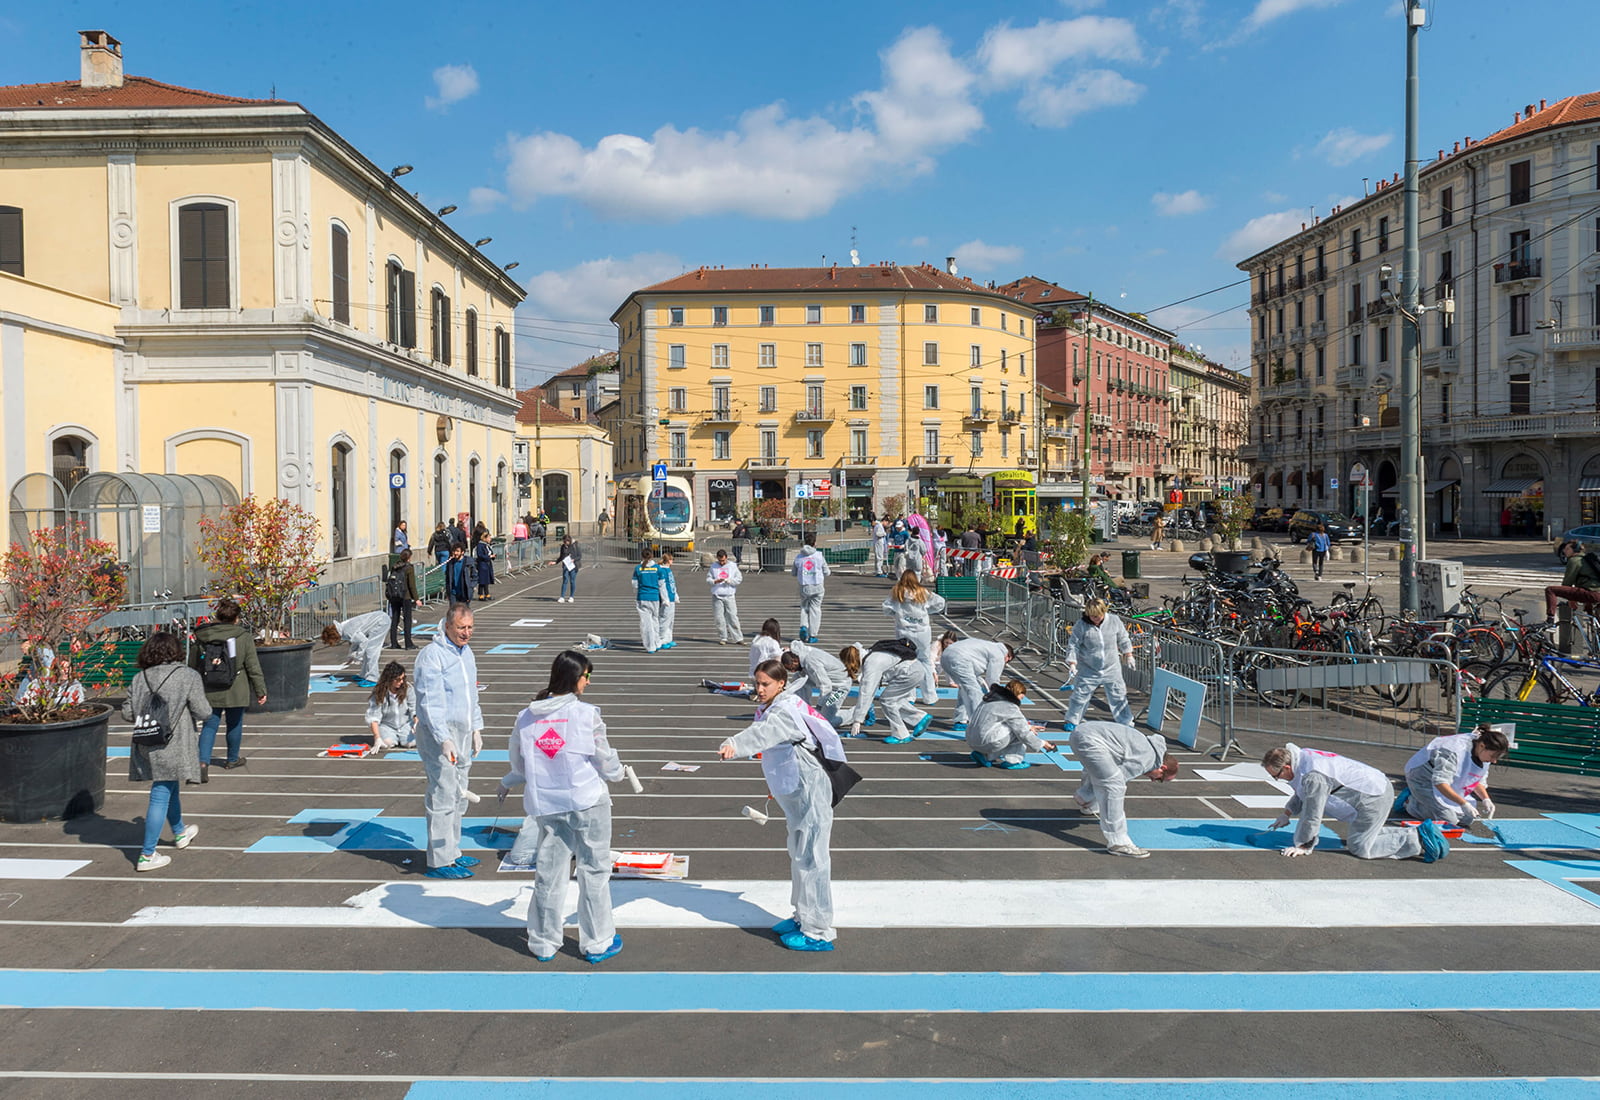 Bloomberg L.P. volunteers paint a pedestrian plaza in Milan, Italy.